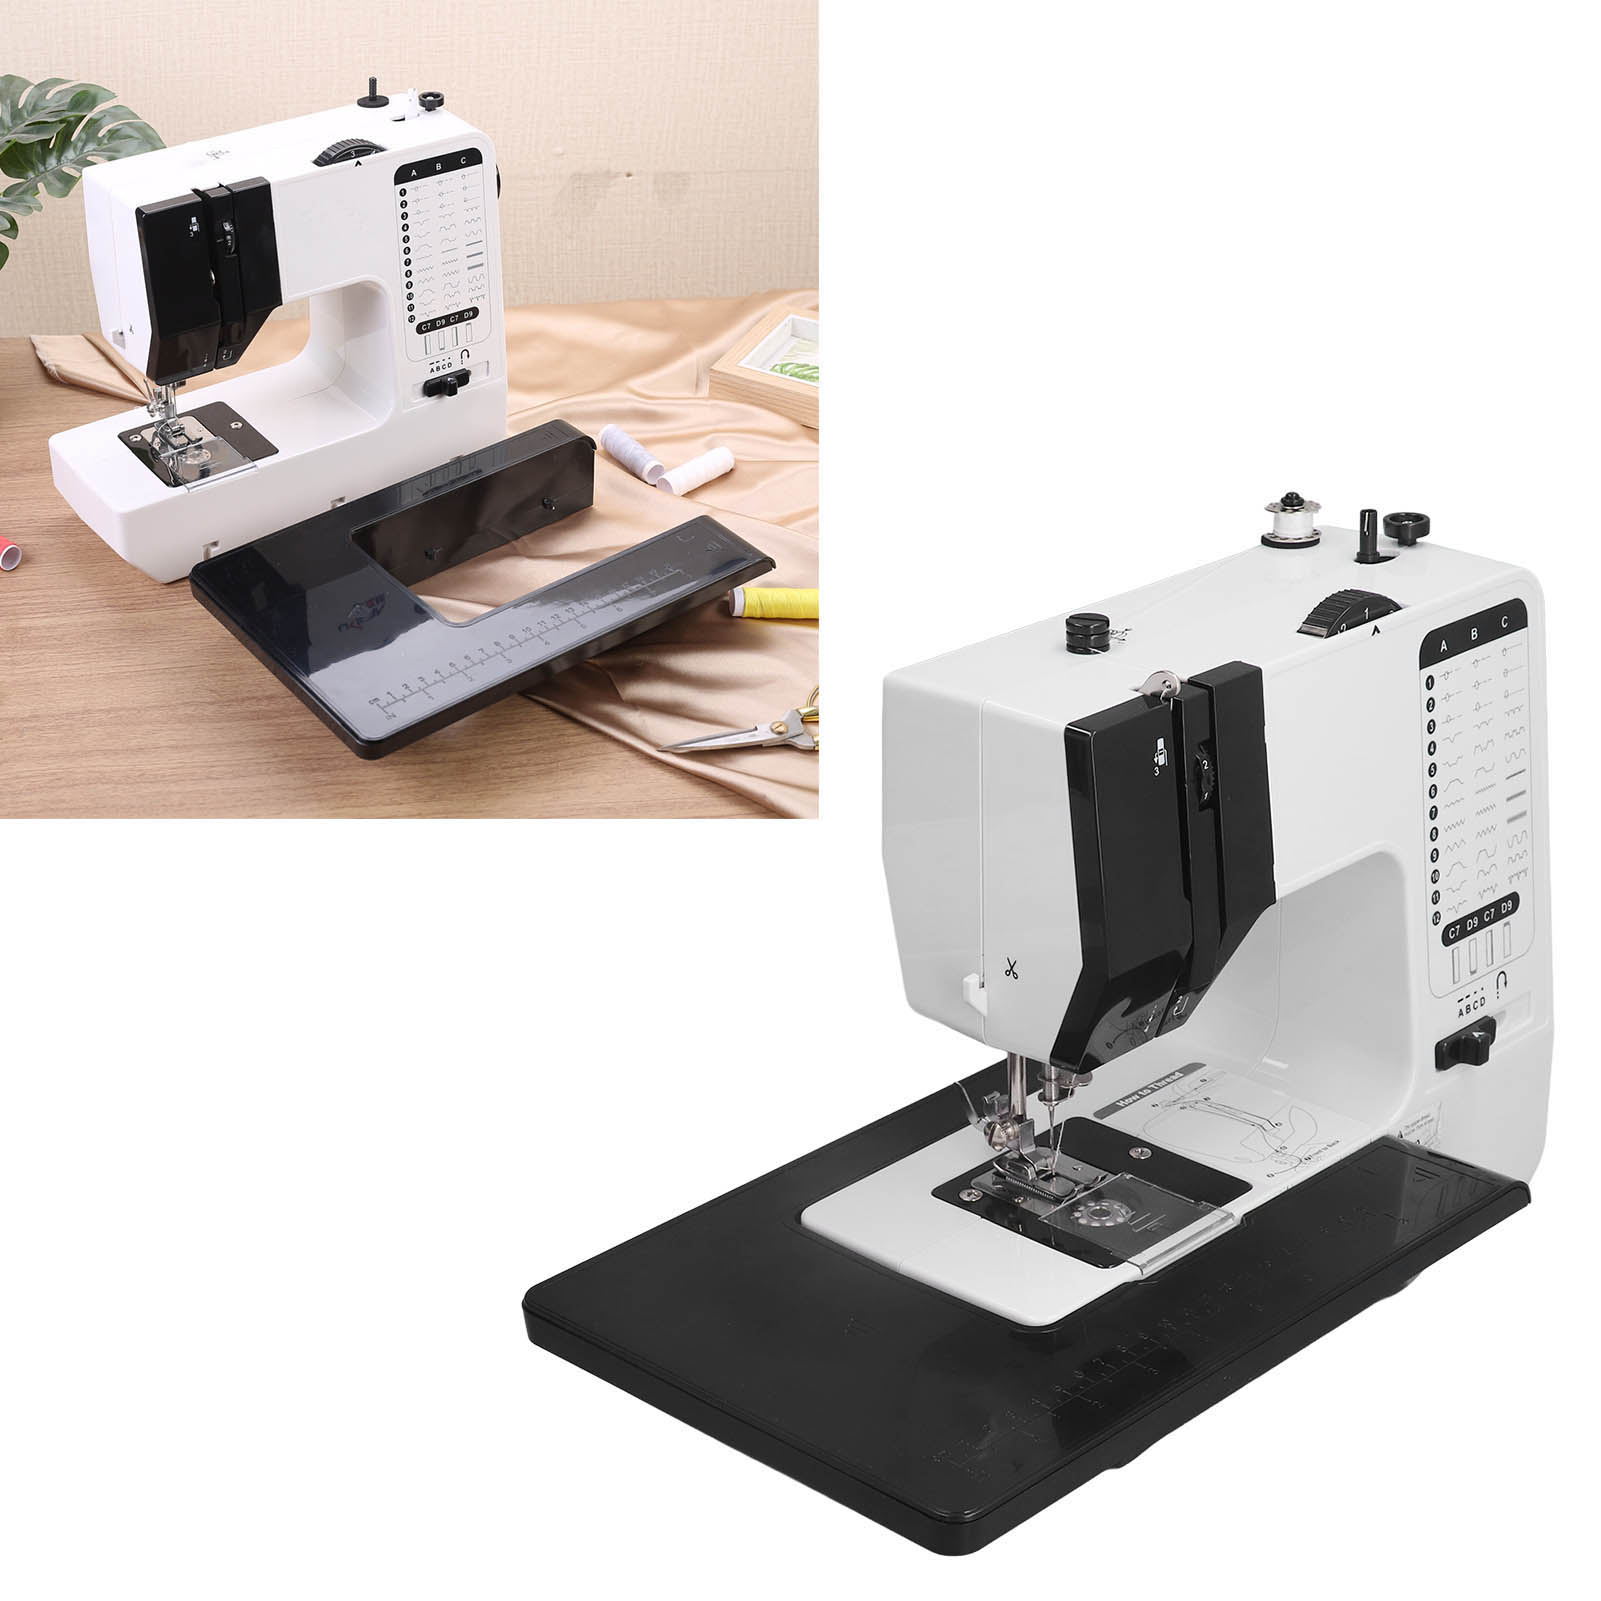 HTVRONT Mini Sewing Machine for Beginners - 38 Built-In Stitches Sewing Machine for Kids with Dual Speed, Reverse Sewing, Wide Table, Light, Easy to